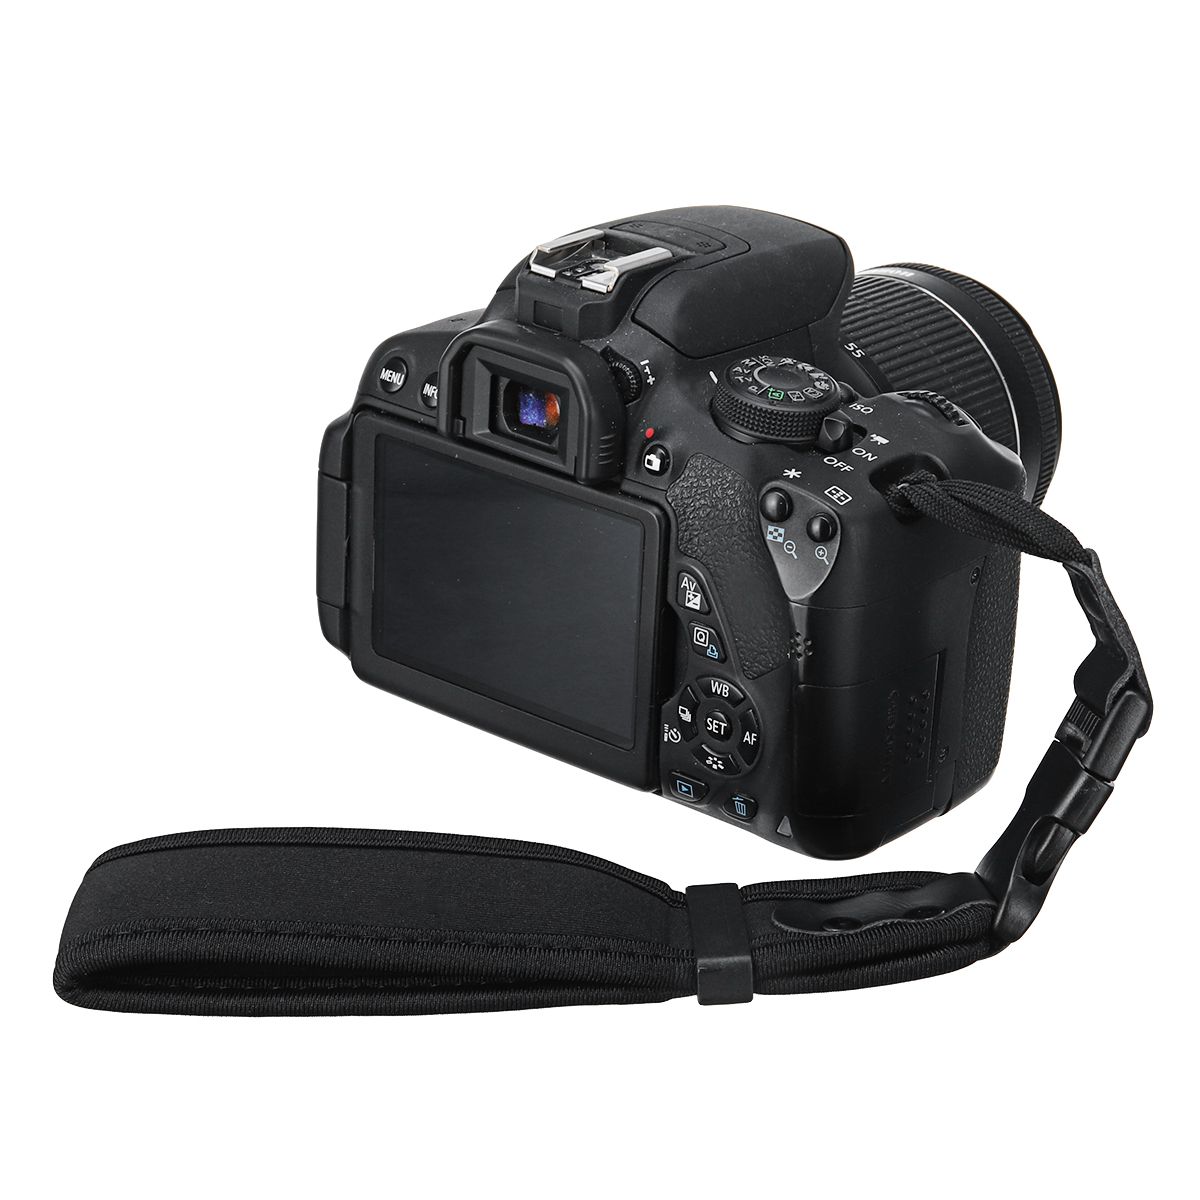 Universal-Adjustable-Camera-Wrist-Strap-Hand-Grip-for-Canon-for-Nikon-for-Sony-1422911